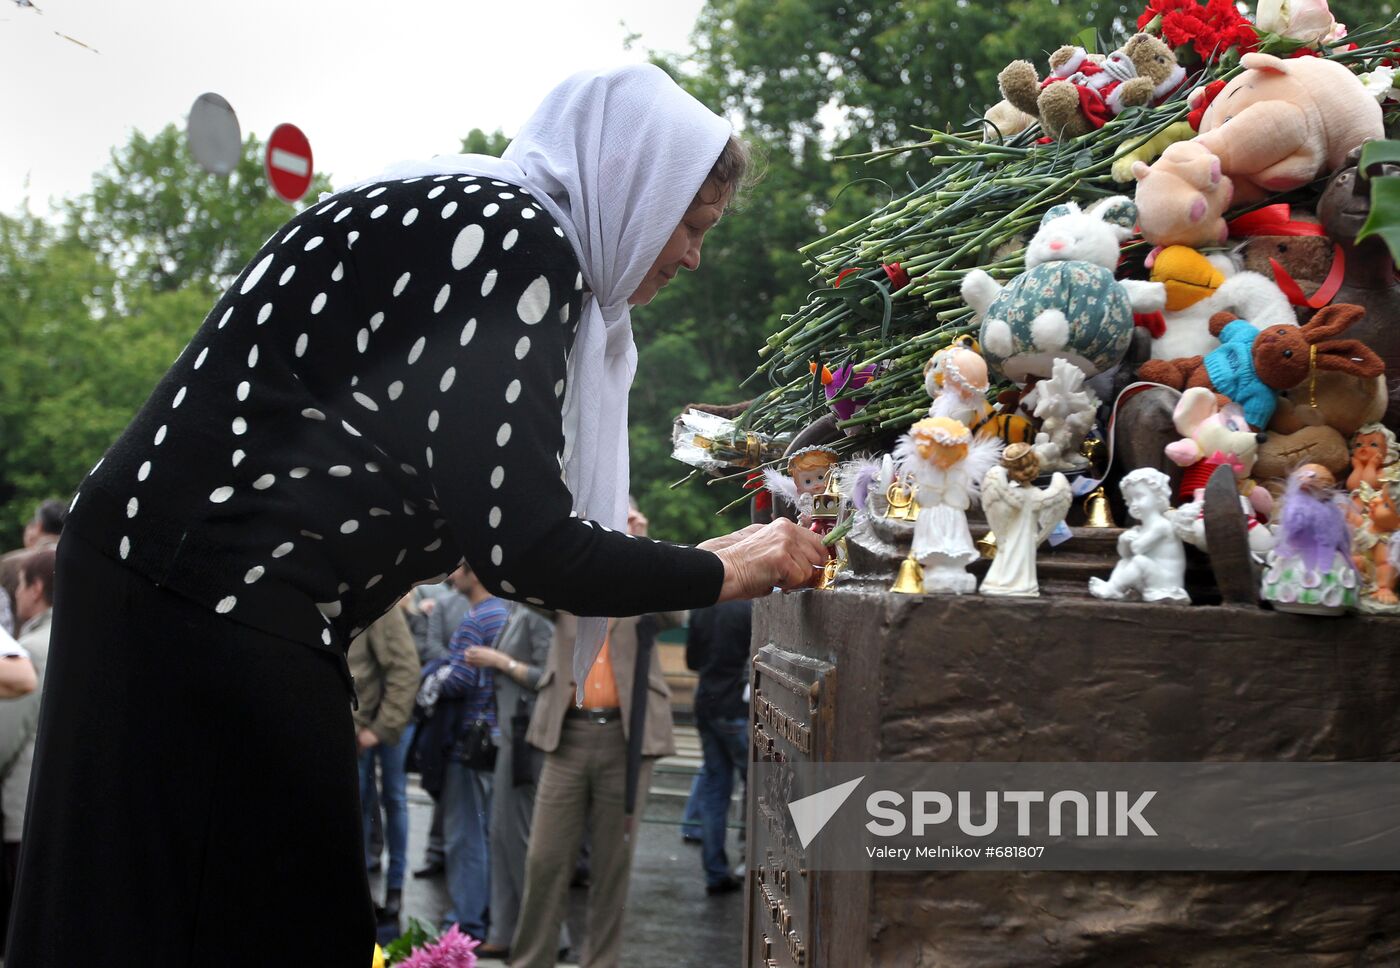 Unveiling the monument to victims of terrorist act in Beslan